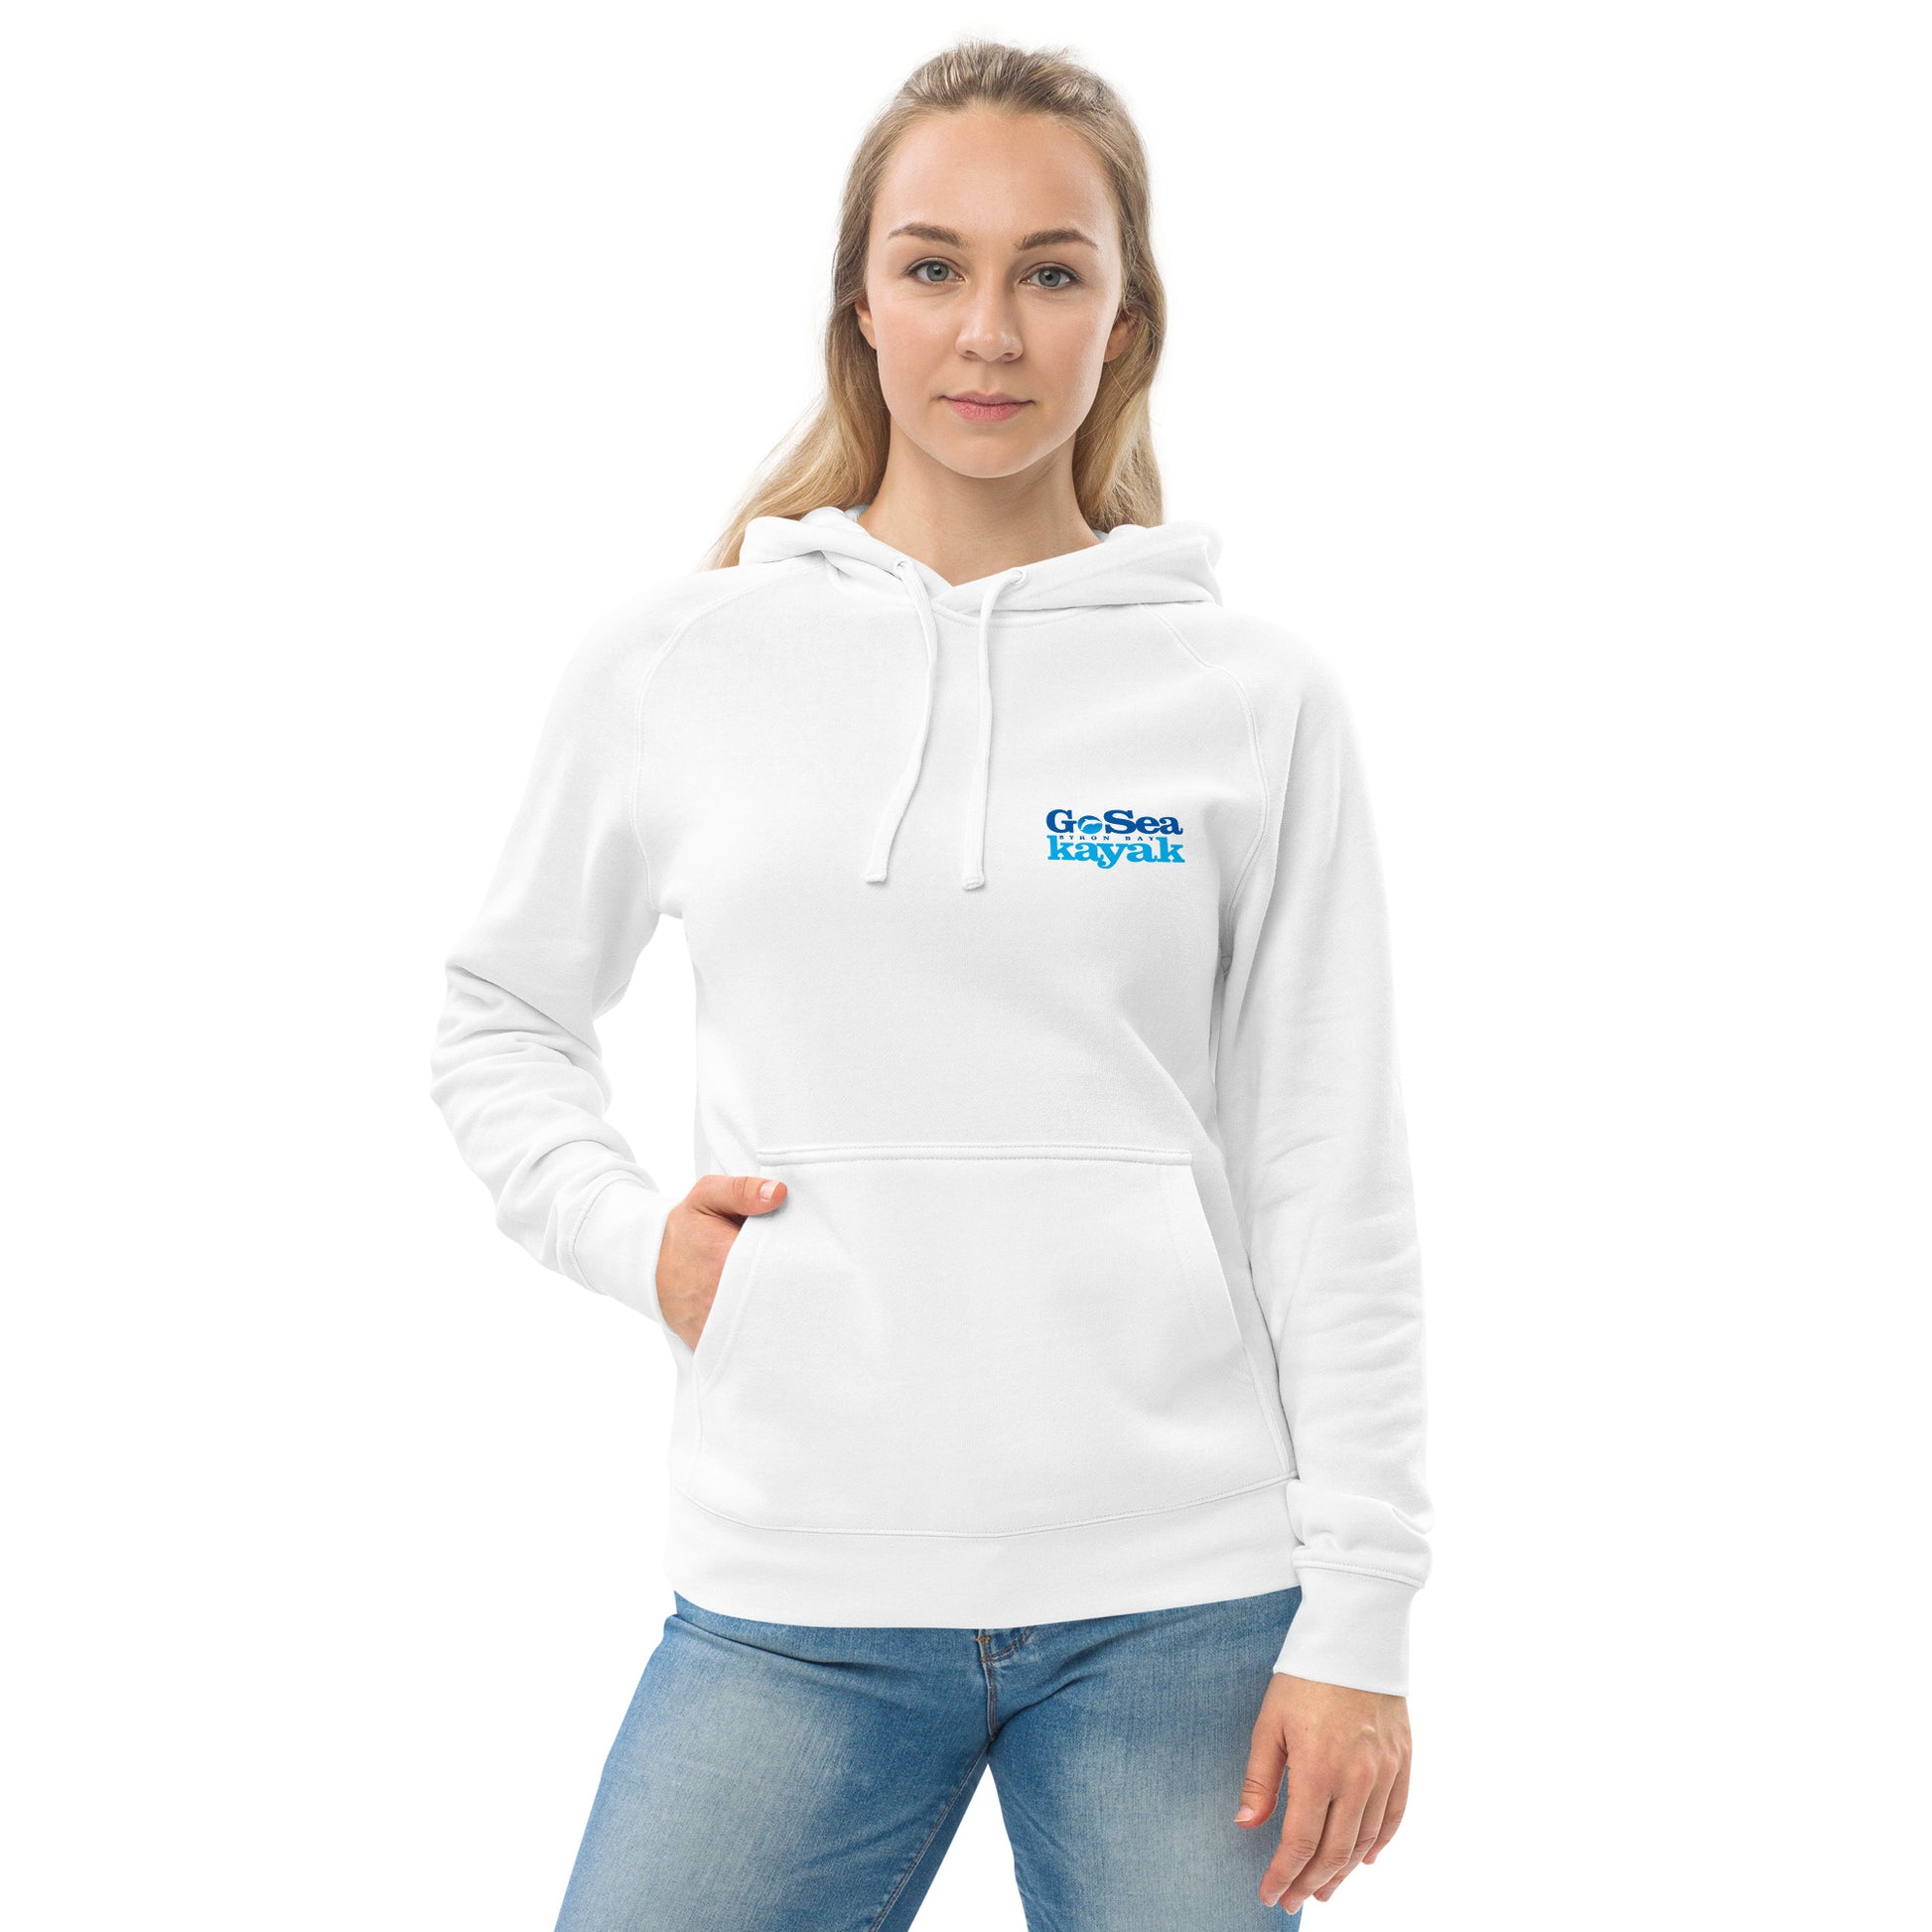  Unisex Hoodie - White - front view being warn by woman - Go Sea Kayak Byron Bay logo on back and front, Kangaroo pocket on front - Genuine Byron Bay Merchandise | Produced by Go Sea Kayak Byron Bay 